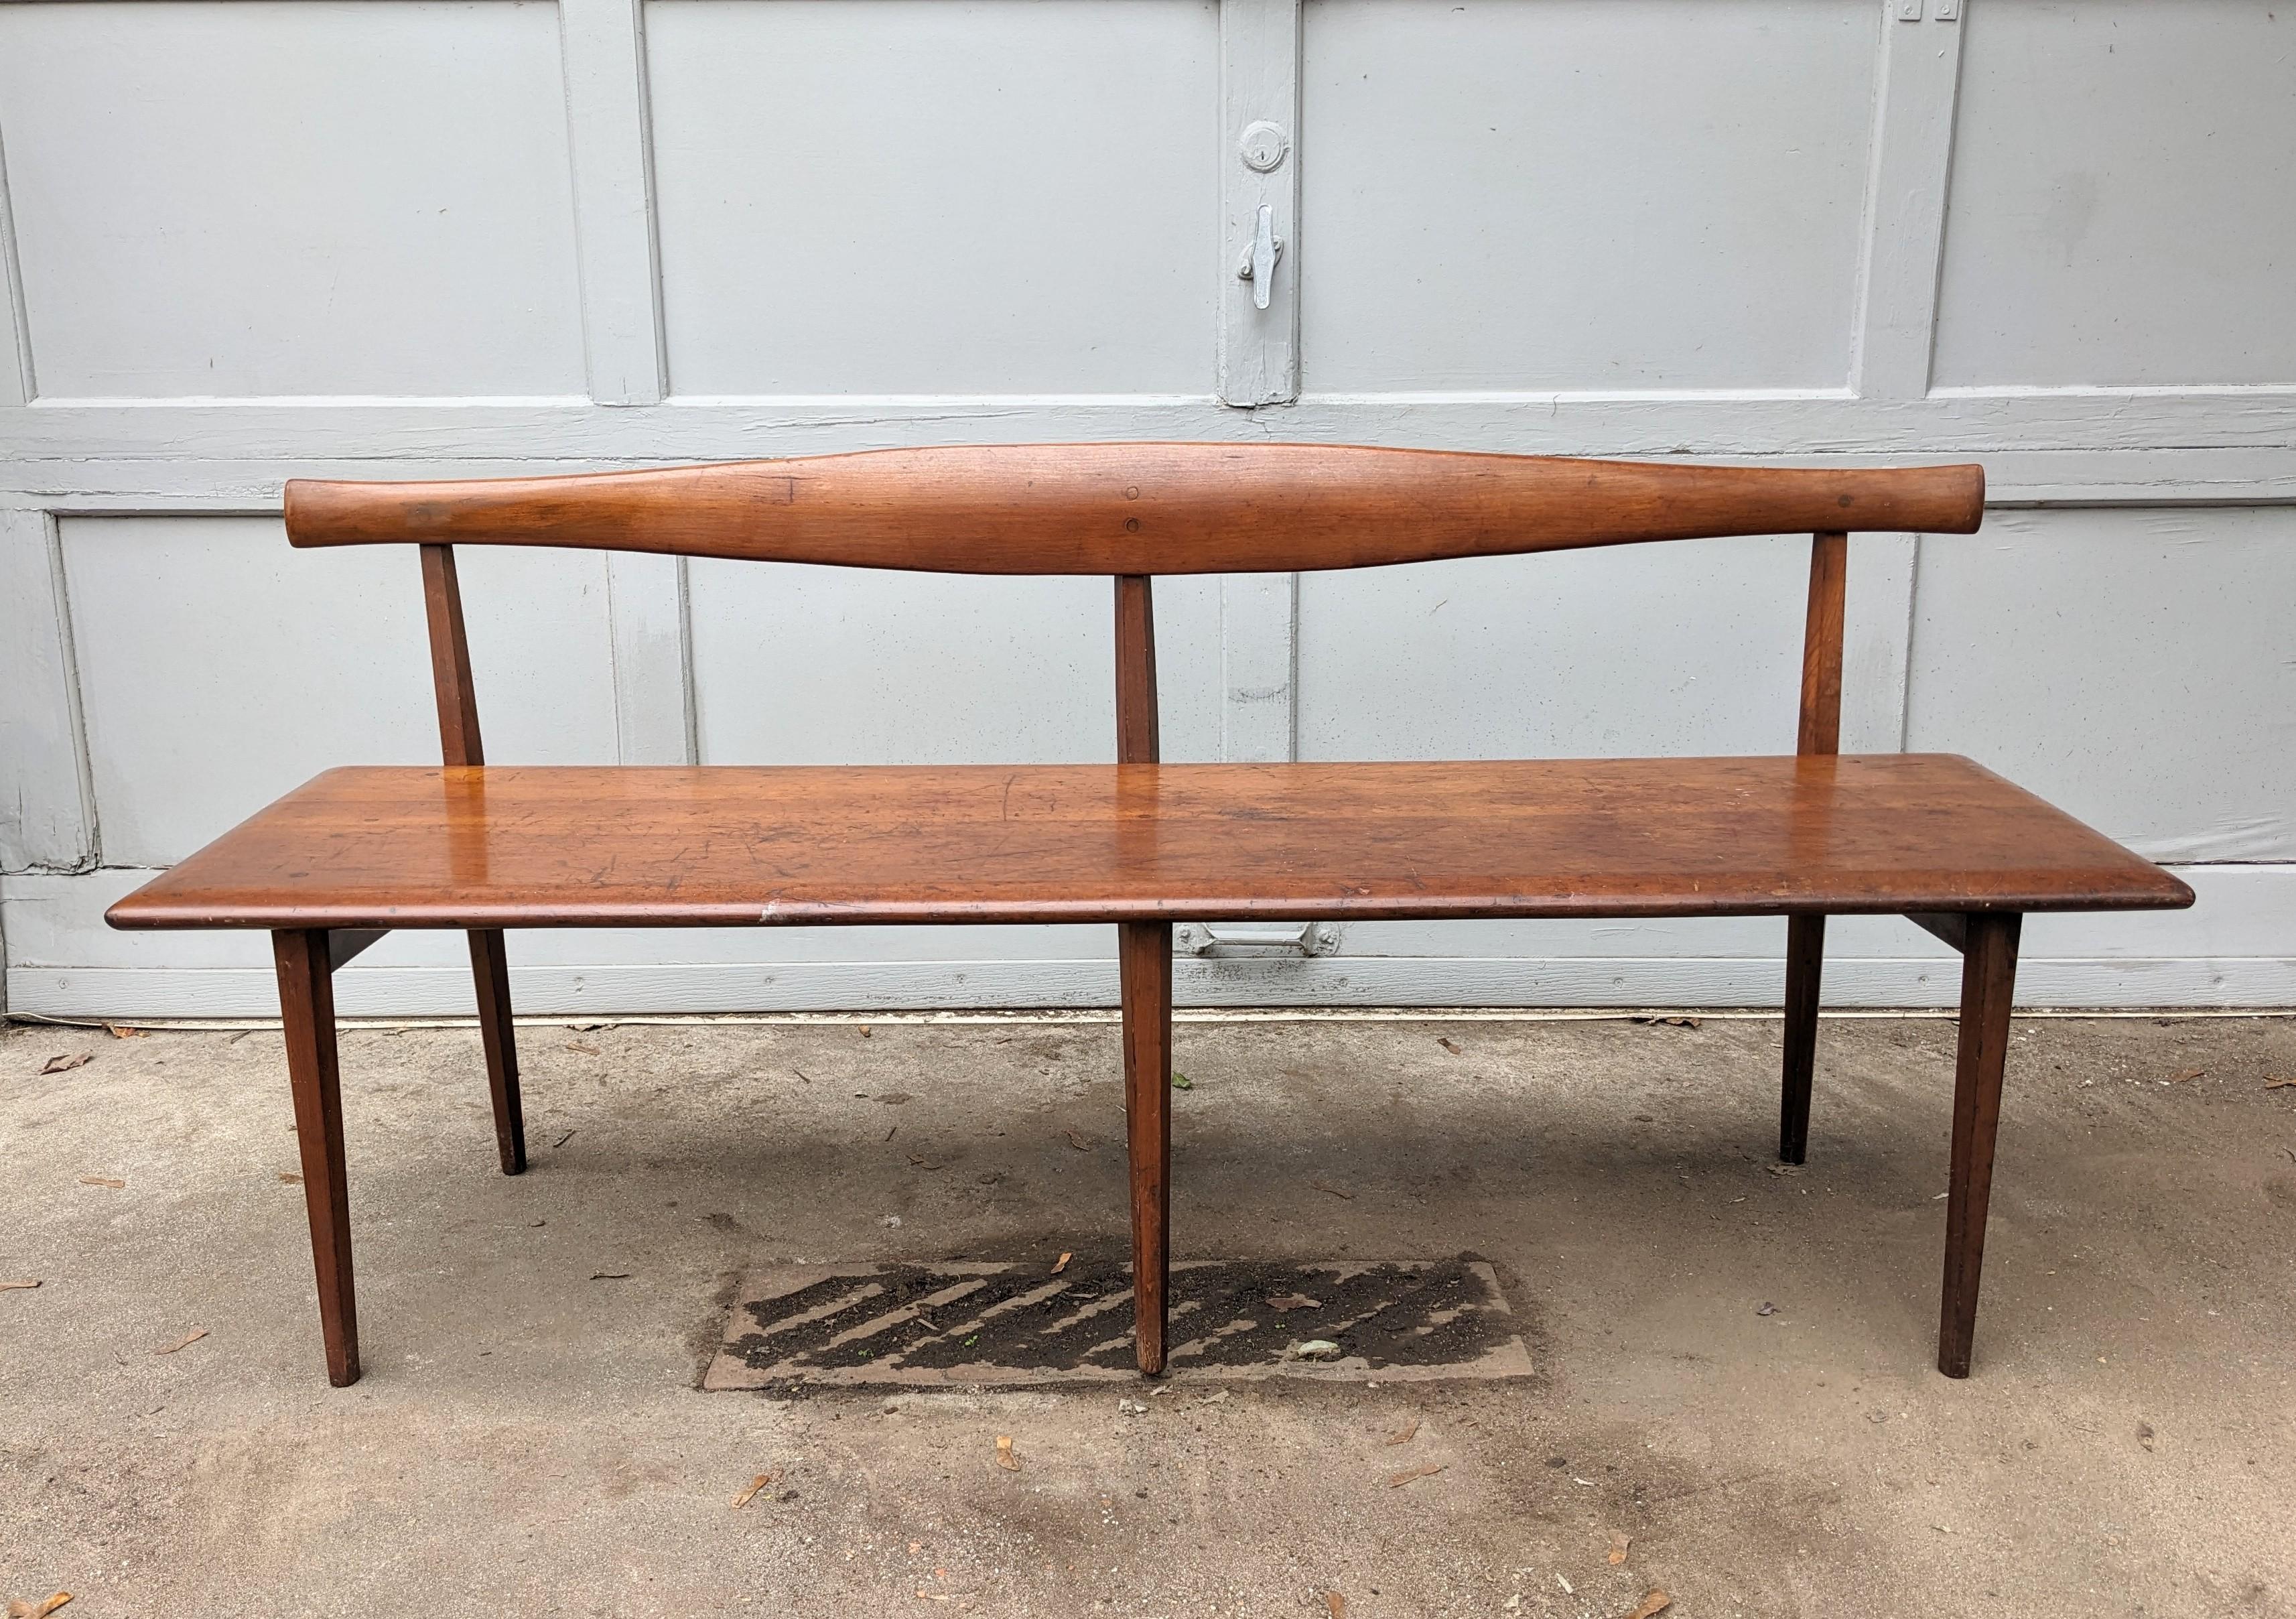 Elegant Mid Century Wood Bench by the Winchendon Furniture Co. with shaped lobed back rest on a simple, sleek design with faceted and tapered legs. Circa 1950's USA. American Design Foundation Medallion.